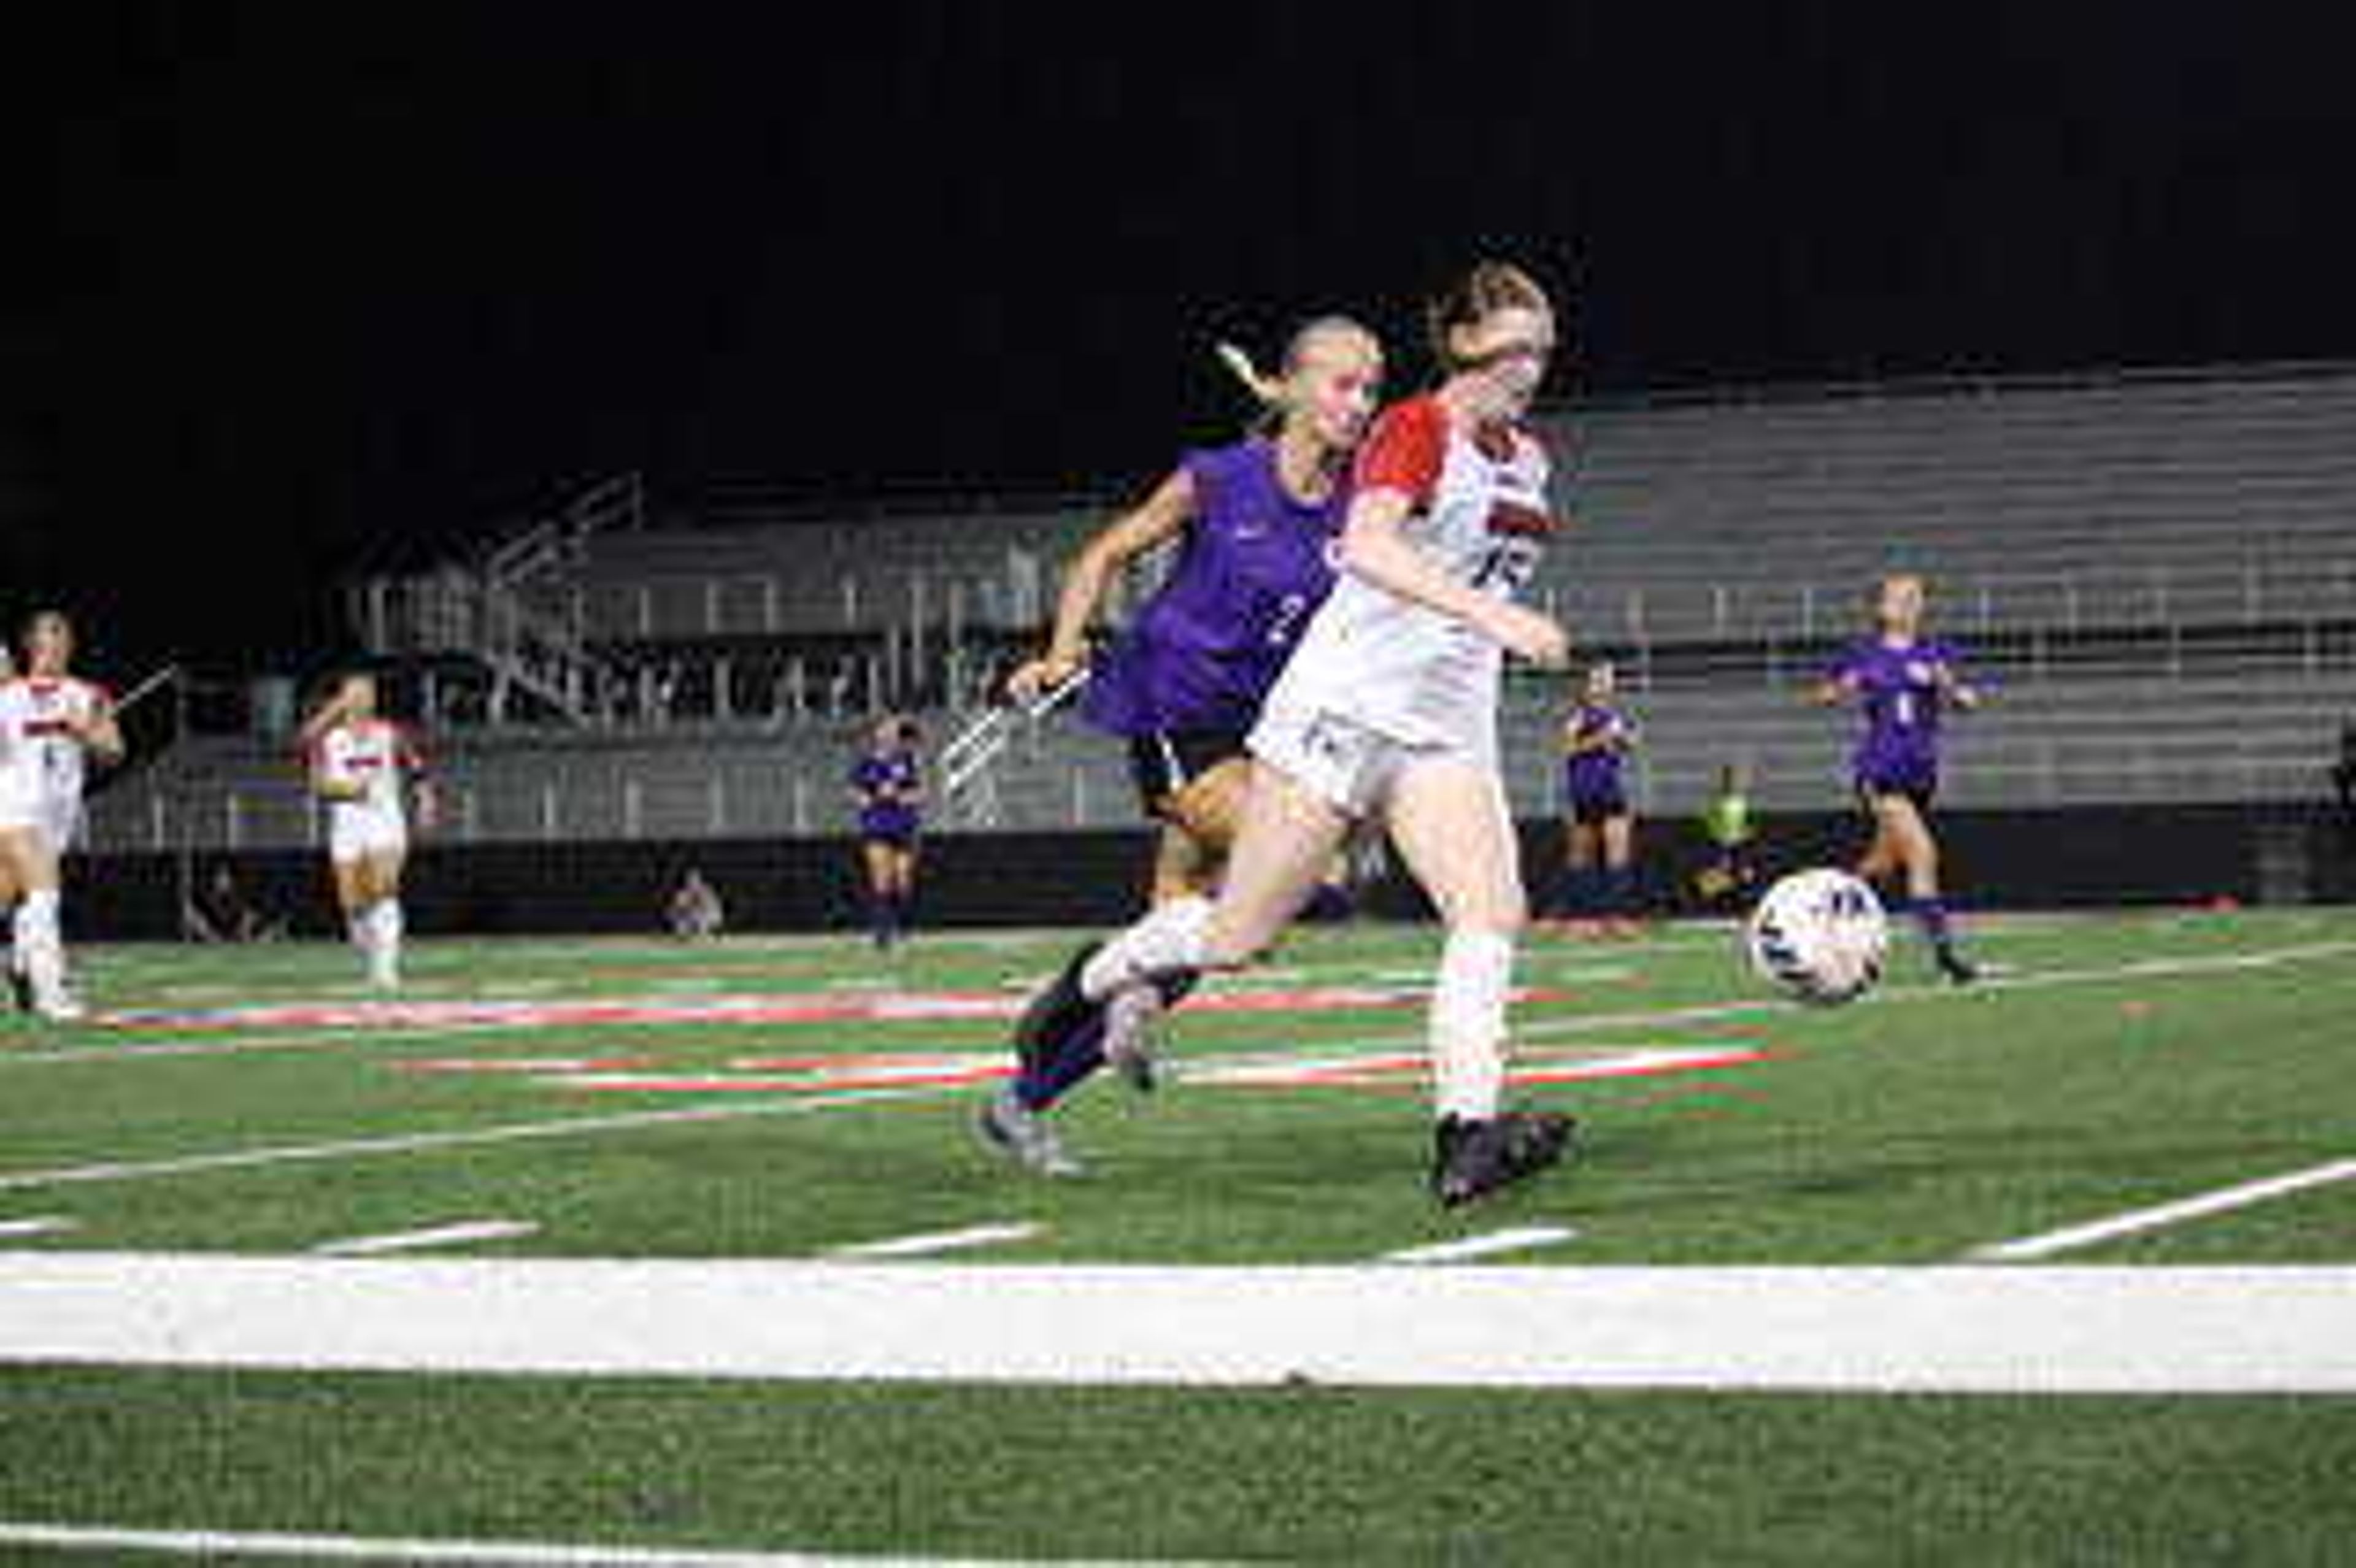 SEMO sophomore forward Melissa Kubin dribbles past a defender during SEMO's 0-0 draw against the Evansville Purple Aces on August 24 at Capaha Field.